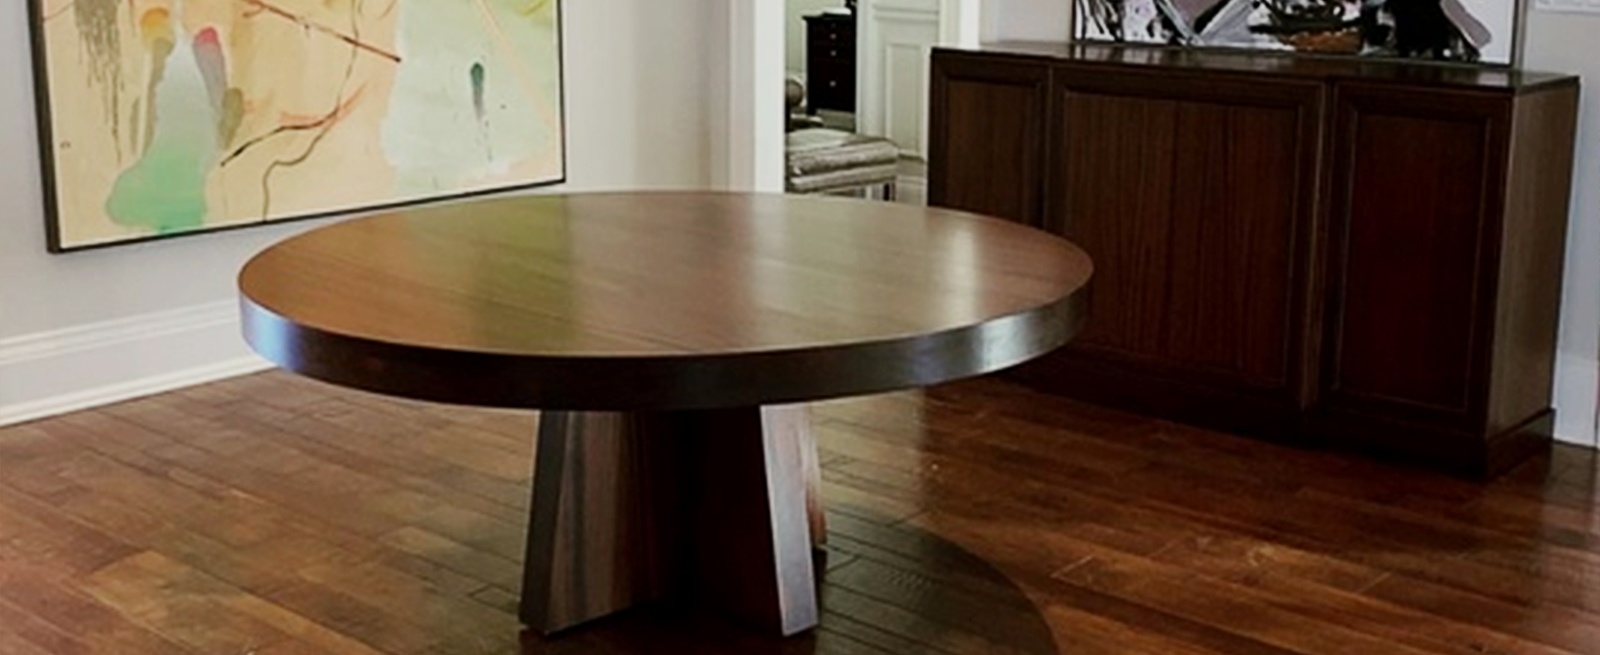 Mississauga Tables Furniture by New Avenue Boutique, Custom Furniture Store